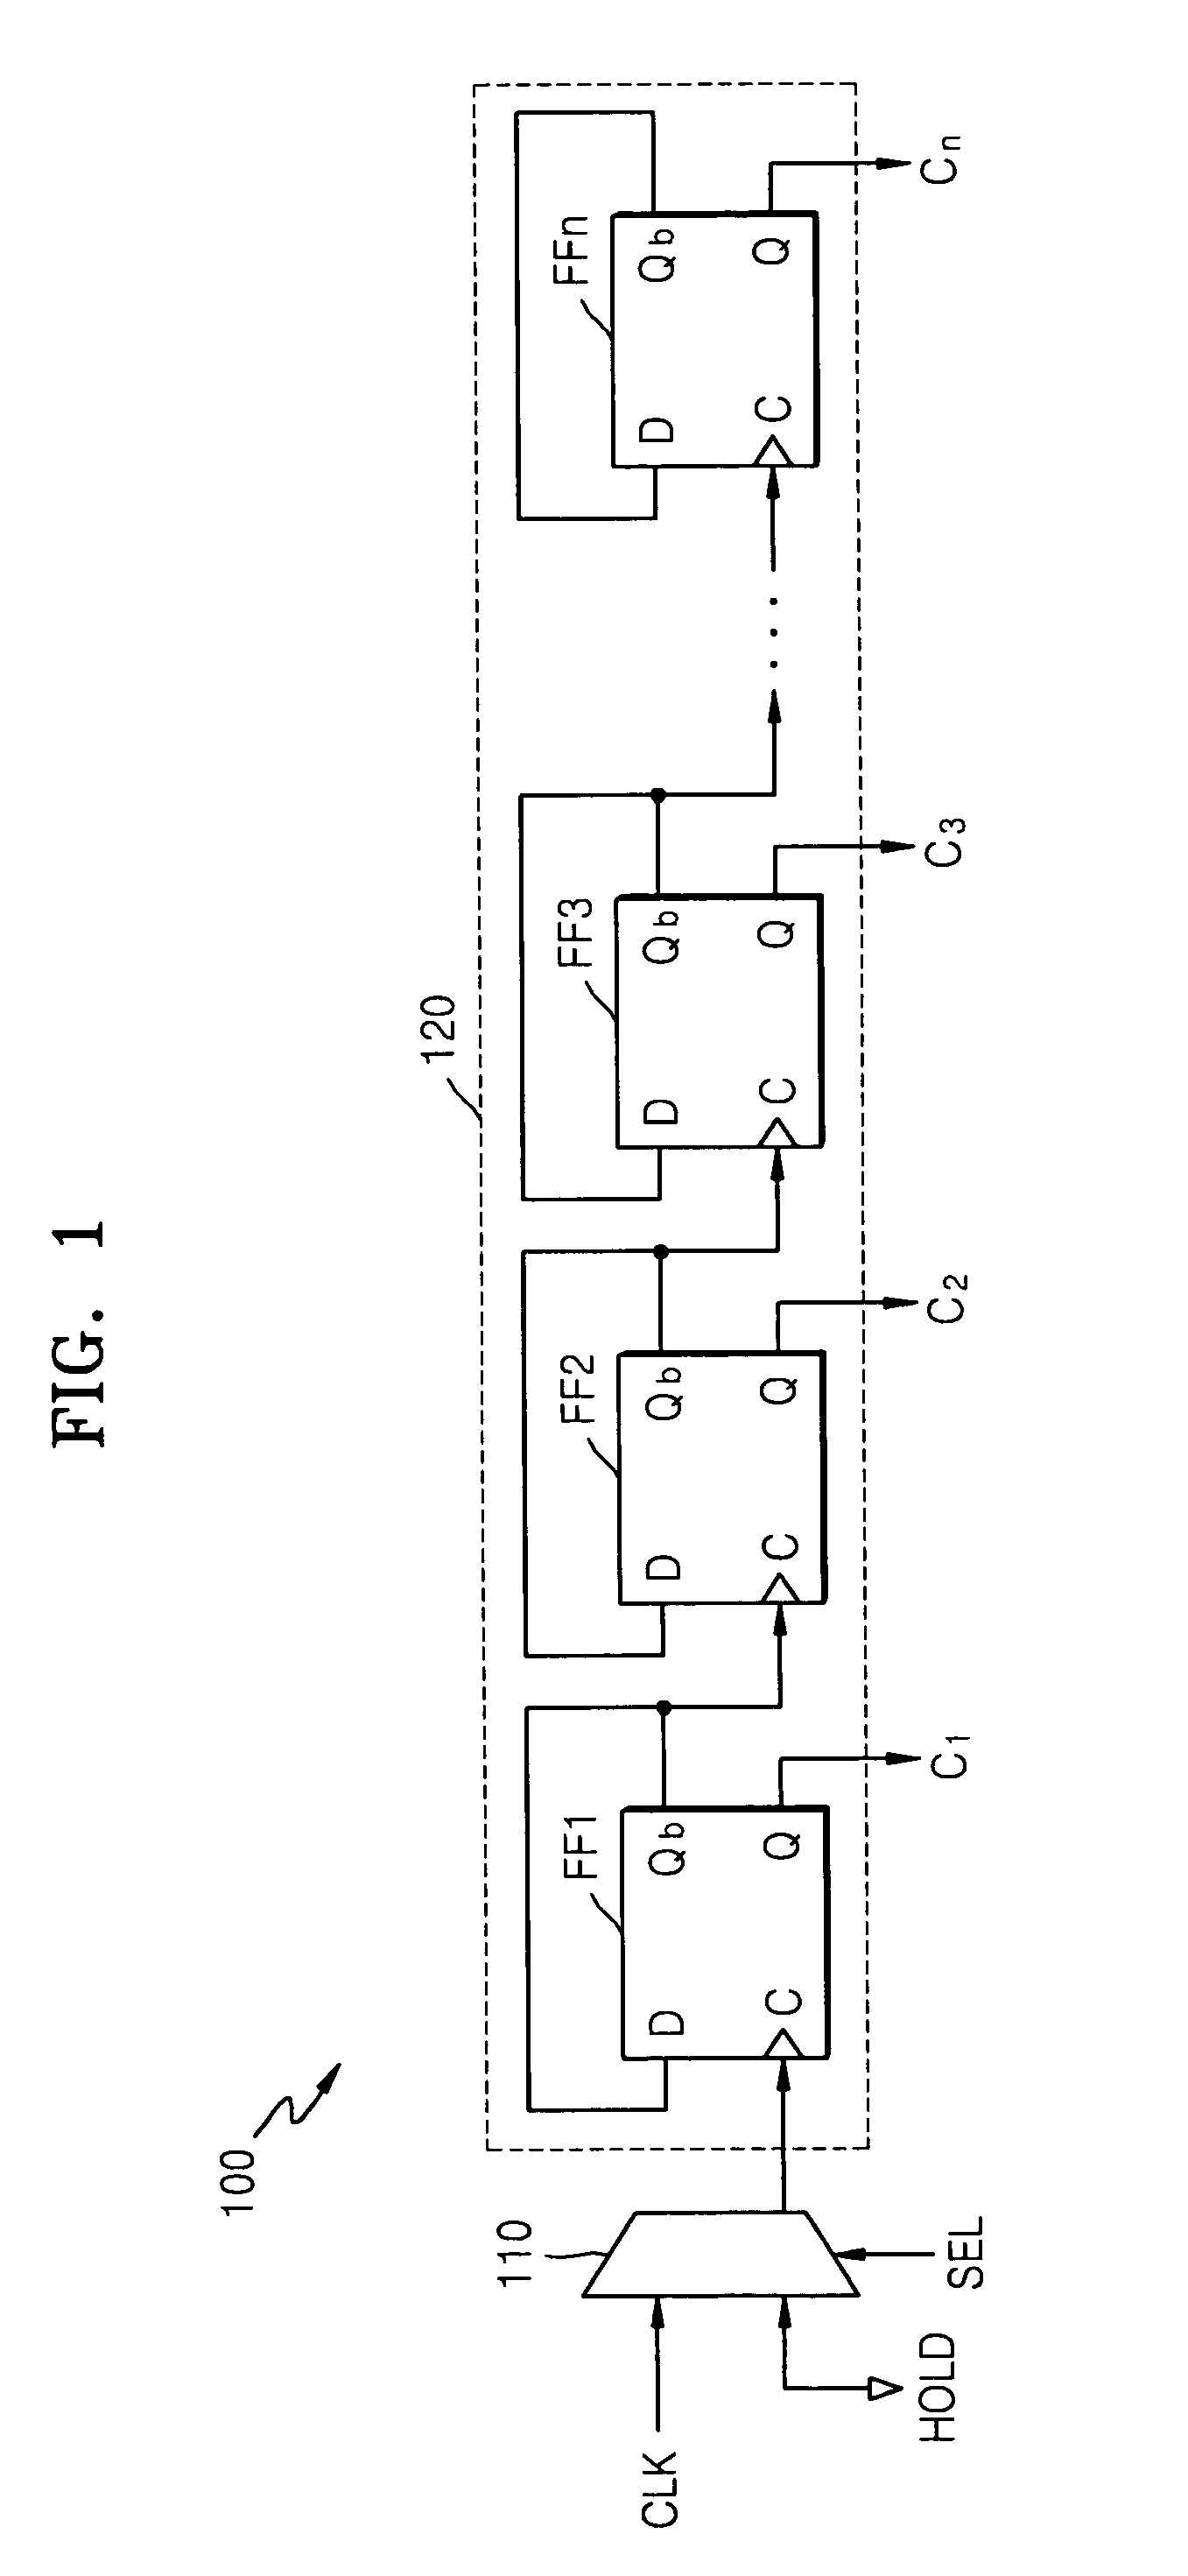 Counter capable of holding and outputting a count value and phase locked loop having the counter